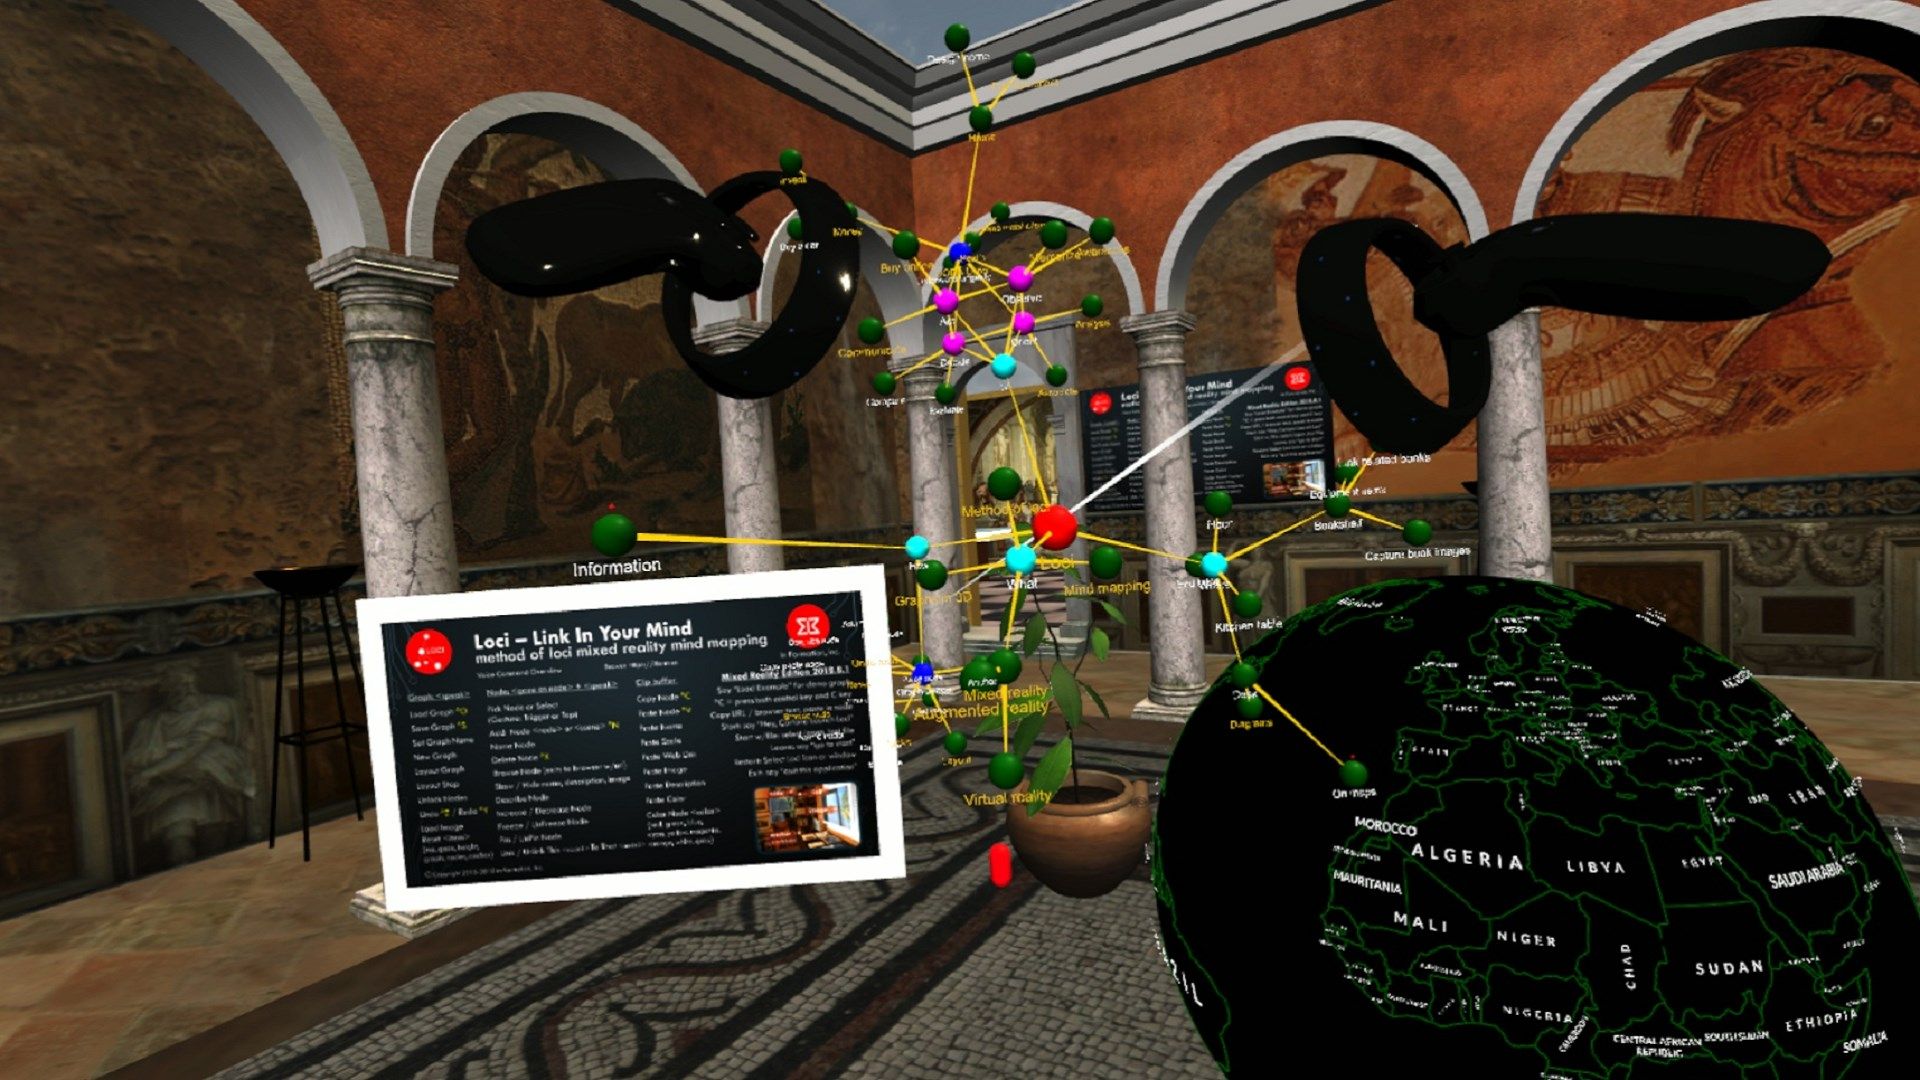 Mixed reality is a great location for your memory palace, where you use locations of your ideas and notes to visualize, analyze and recall important items in your decisions.